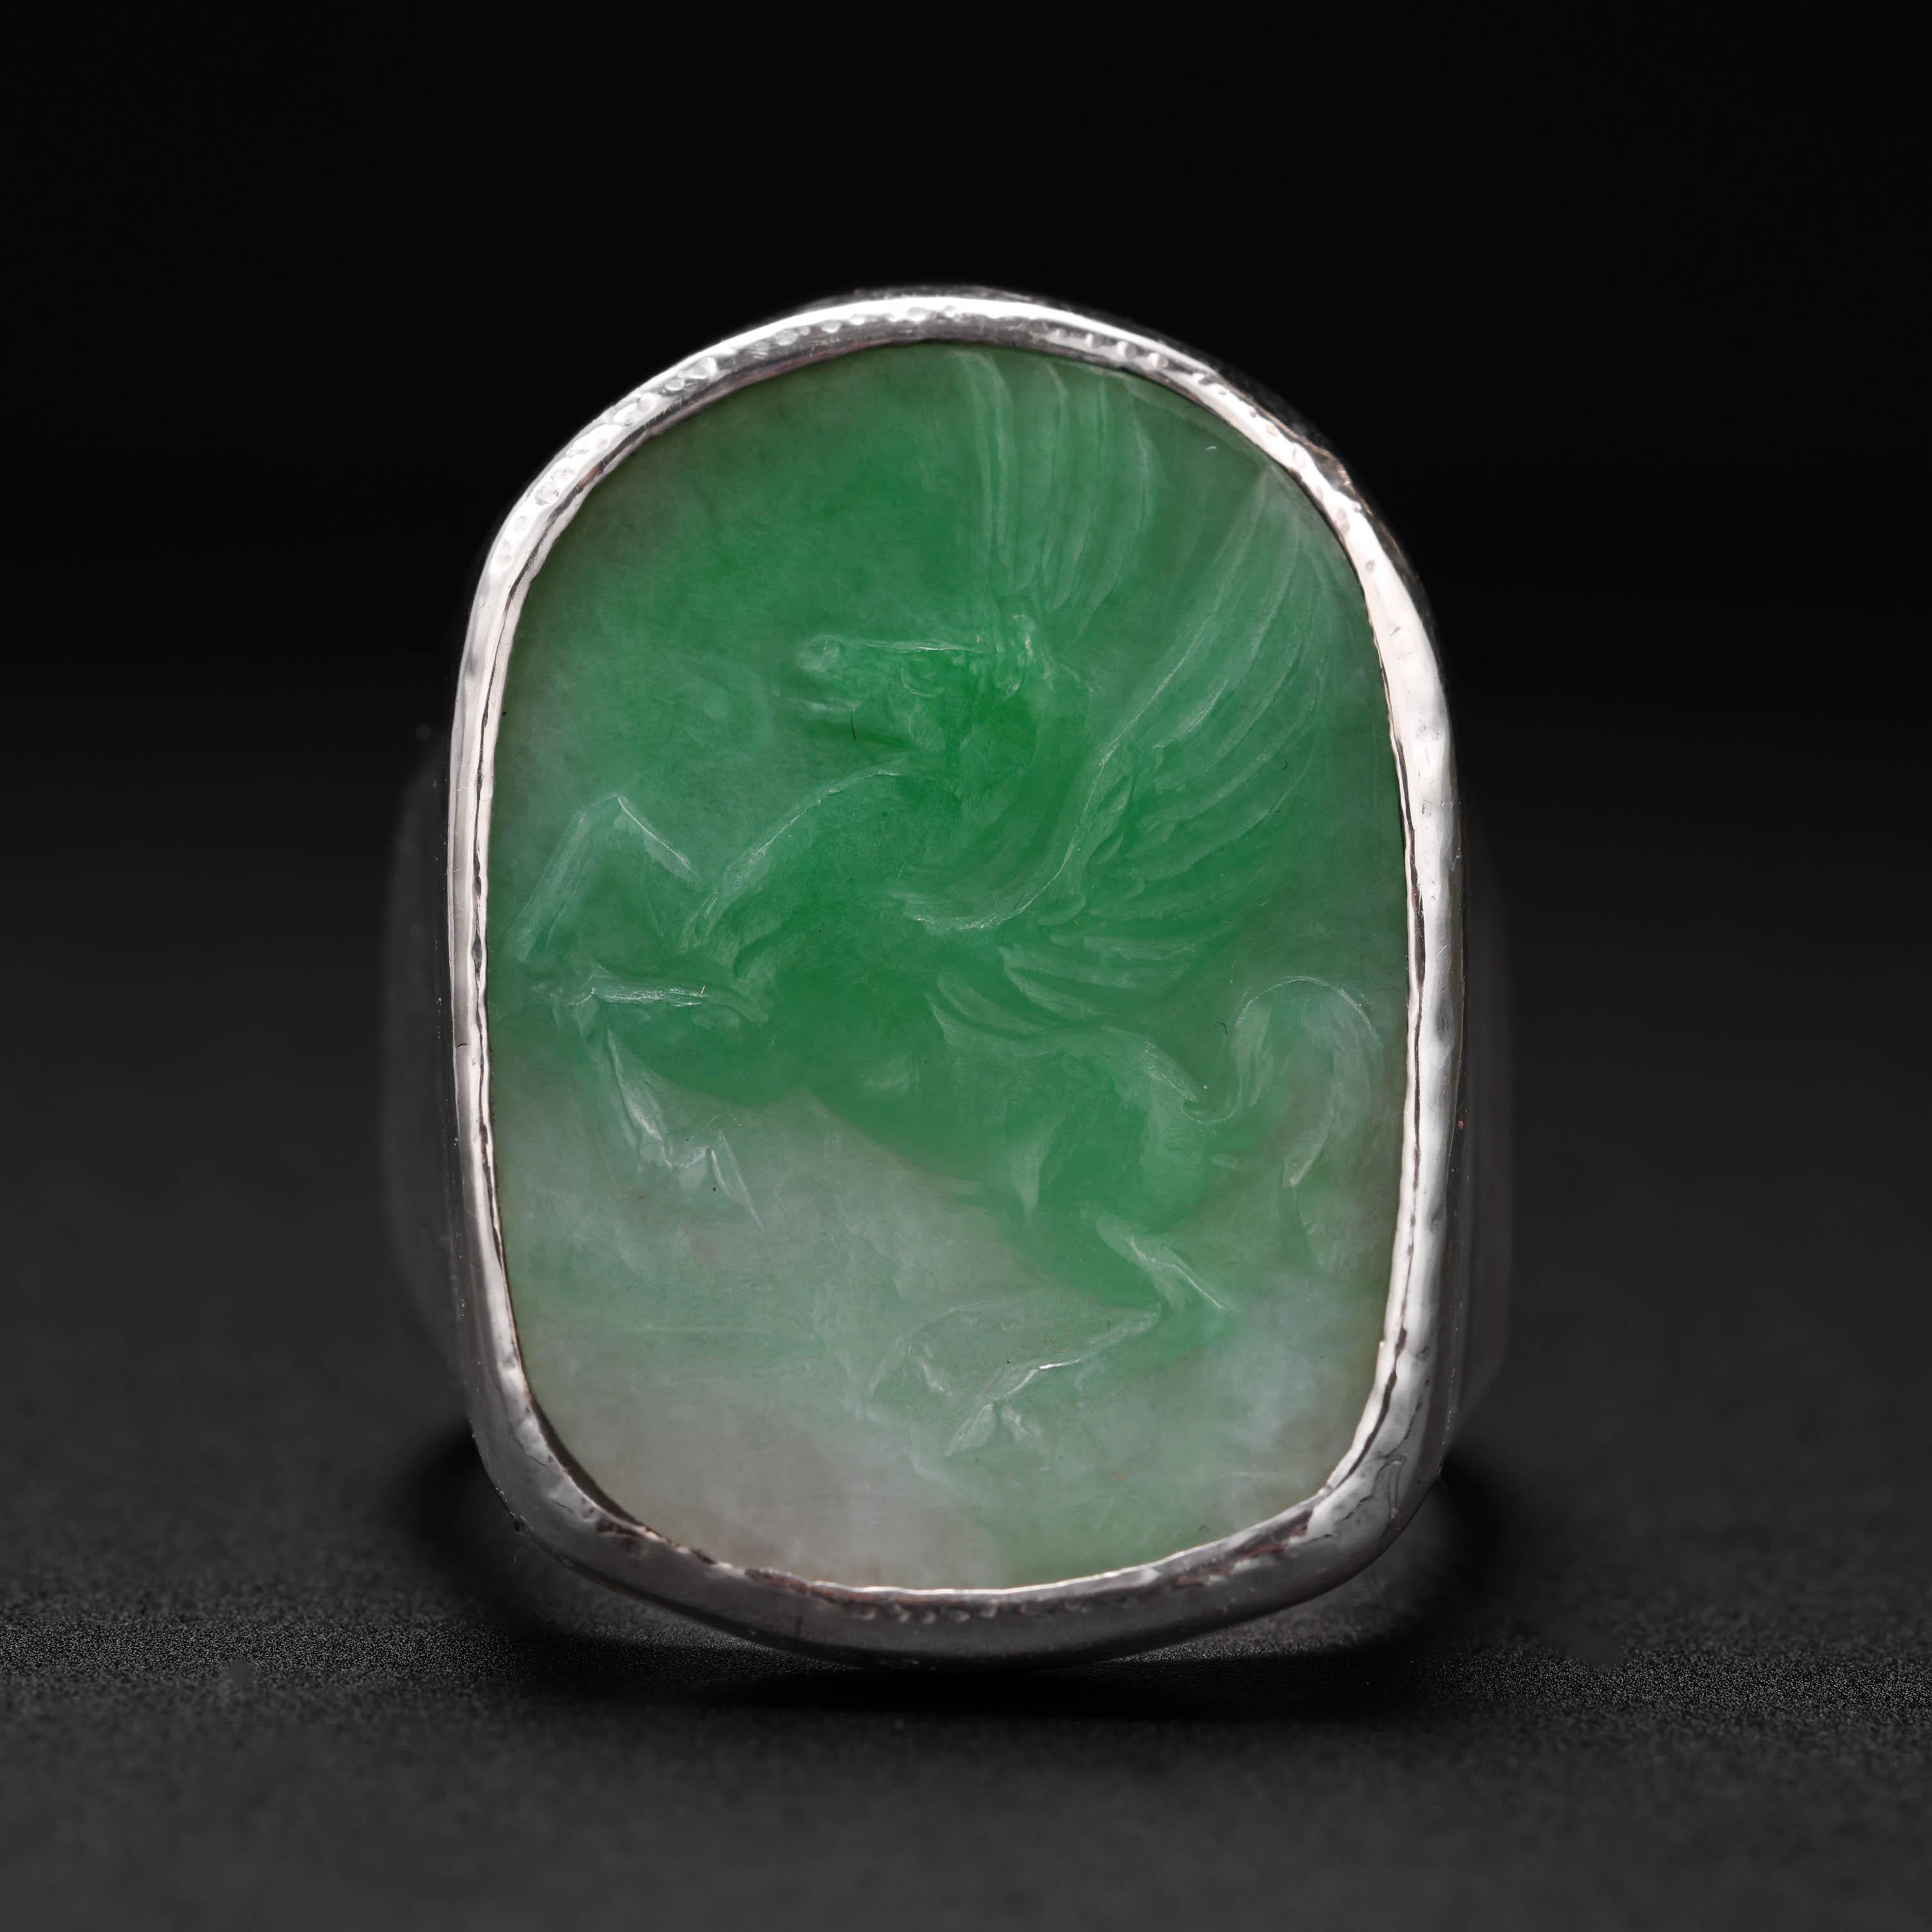 A plaque of moss-on-snow natural and untreated Burmese jadeite jade has been intricately, impeccably hand-carved to depict Pegasus; the winged horse from Greek Mythology. The freeform-shaped plaque is bezel-set within a custom setting made to fit